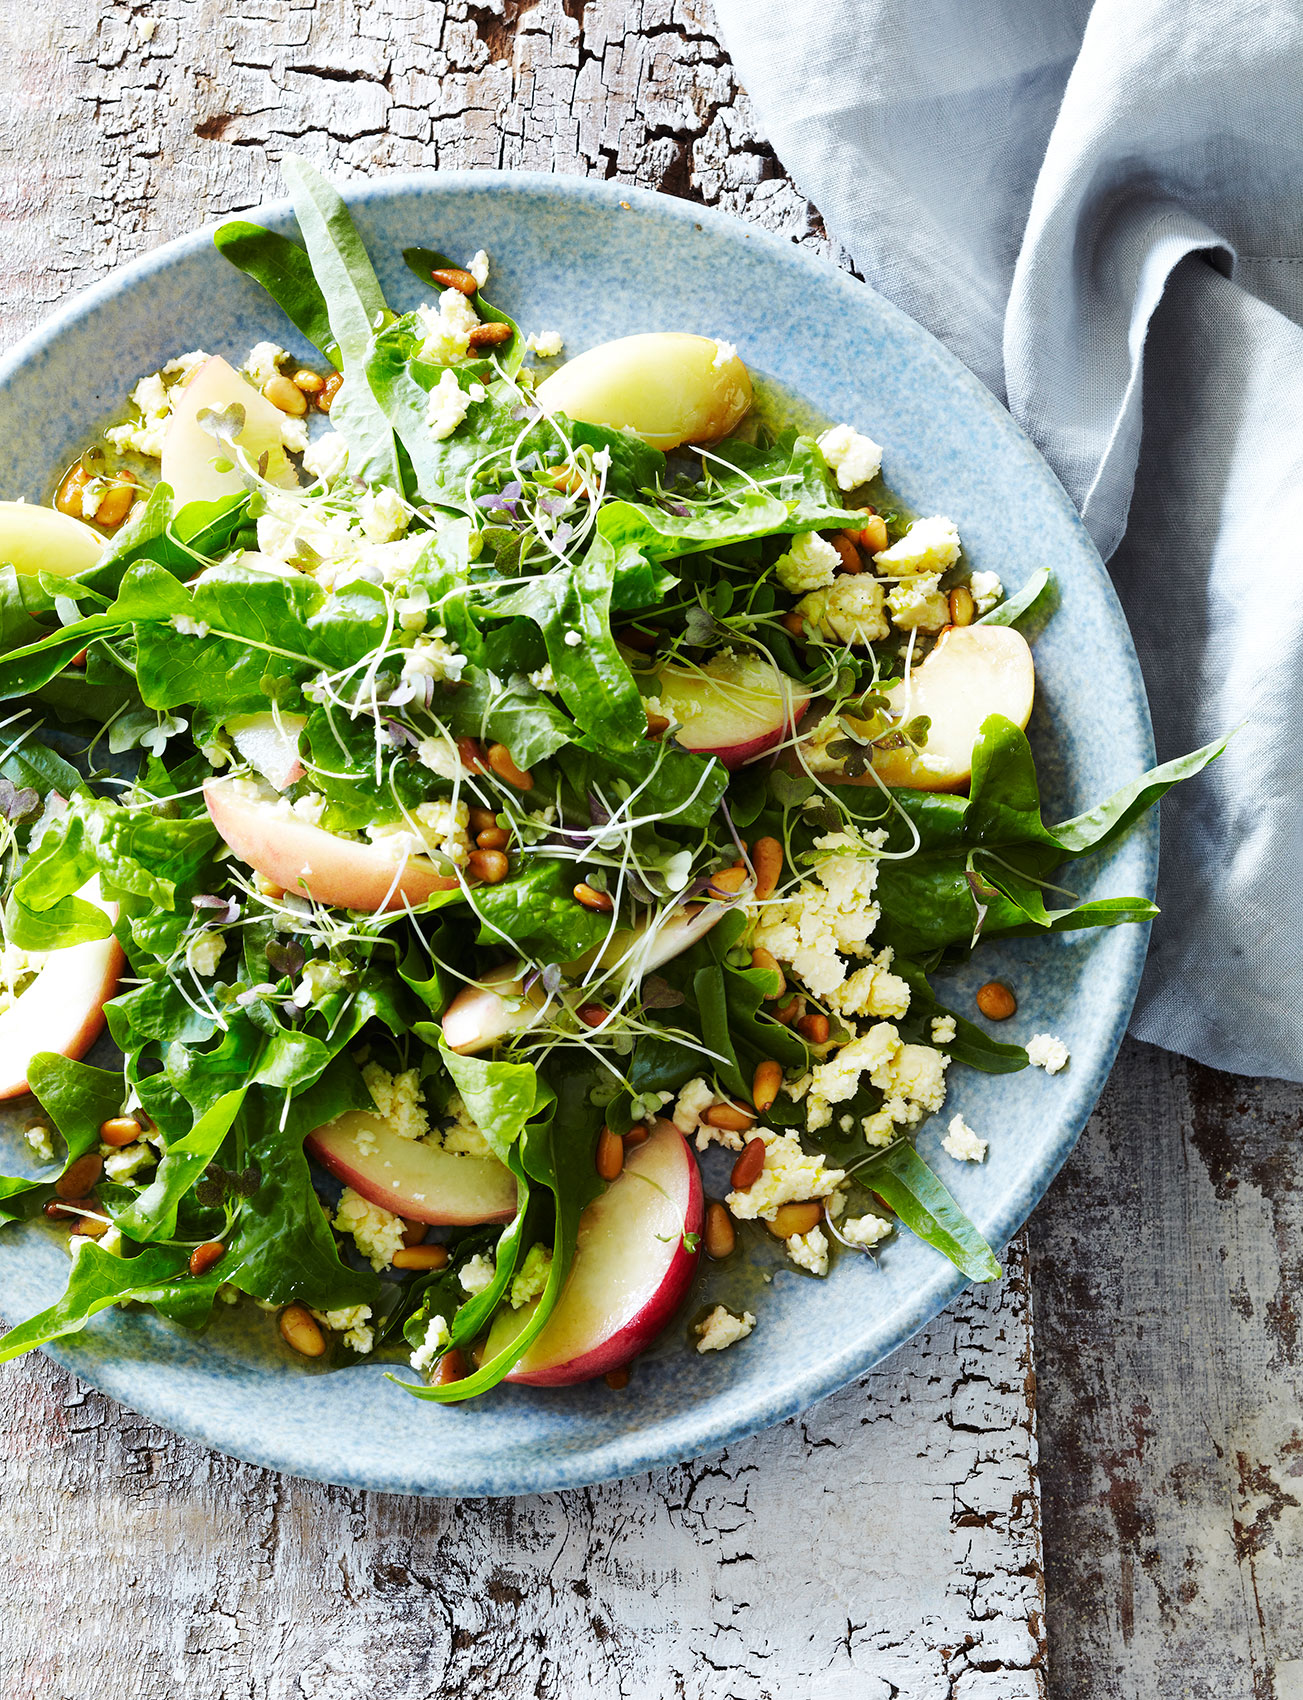 Simple Salads • Green Oak Peach Salad with Feta, Pine Nuts & Sprouts • Cookbook & Editorial Food Photography